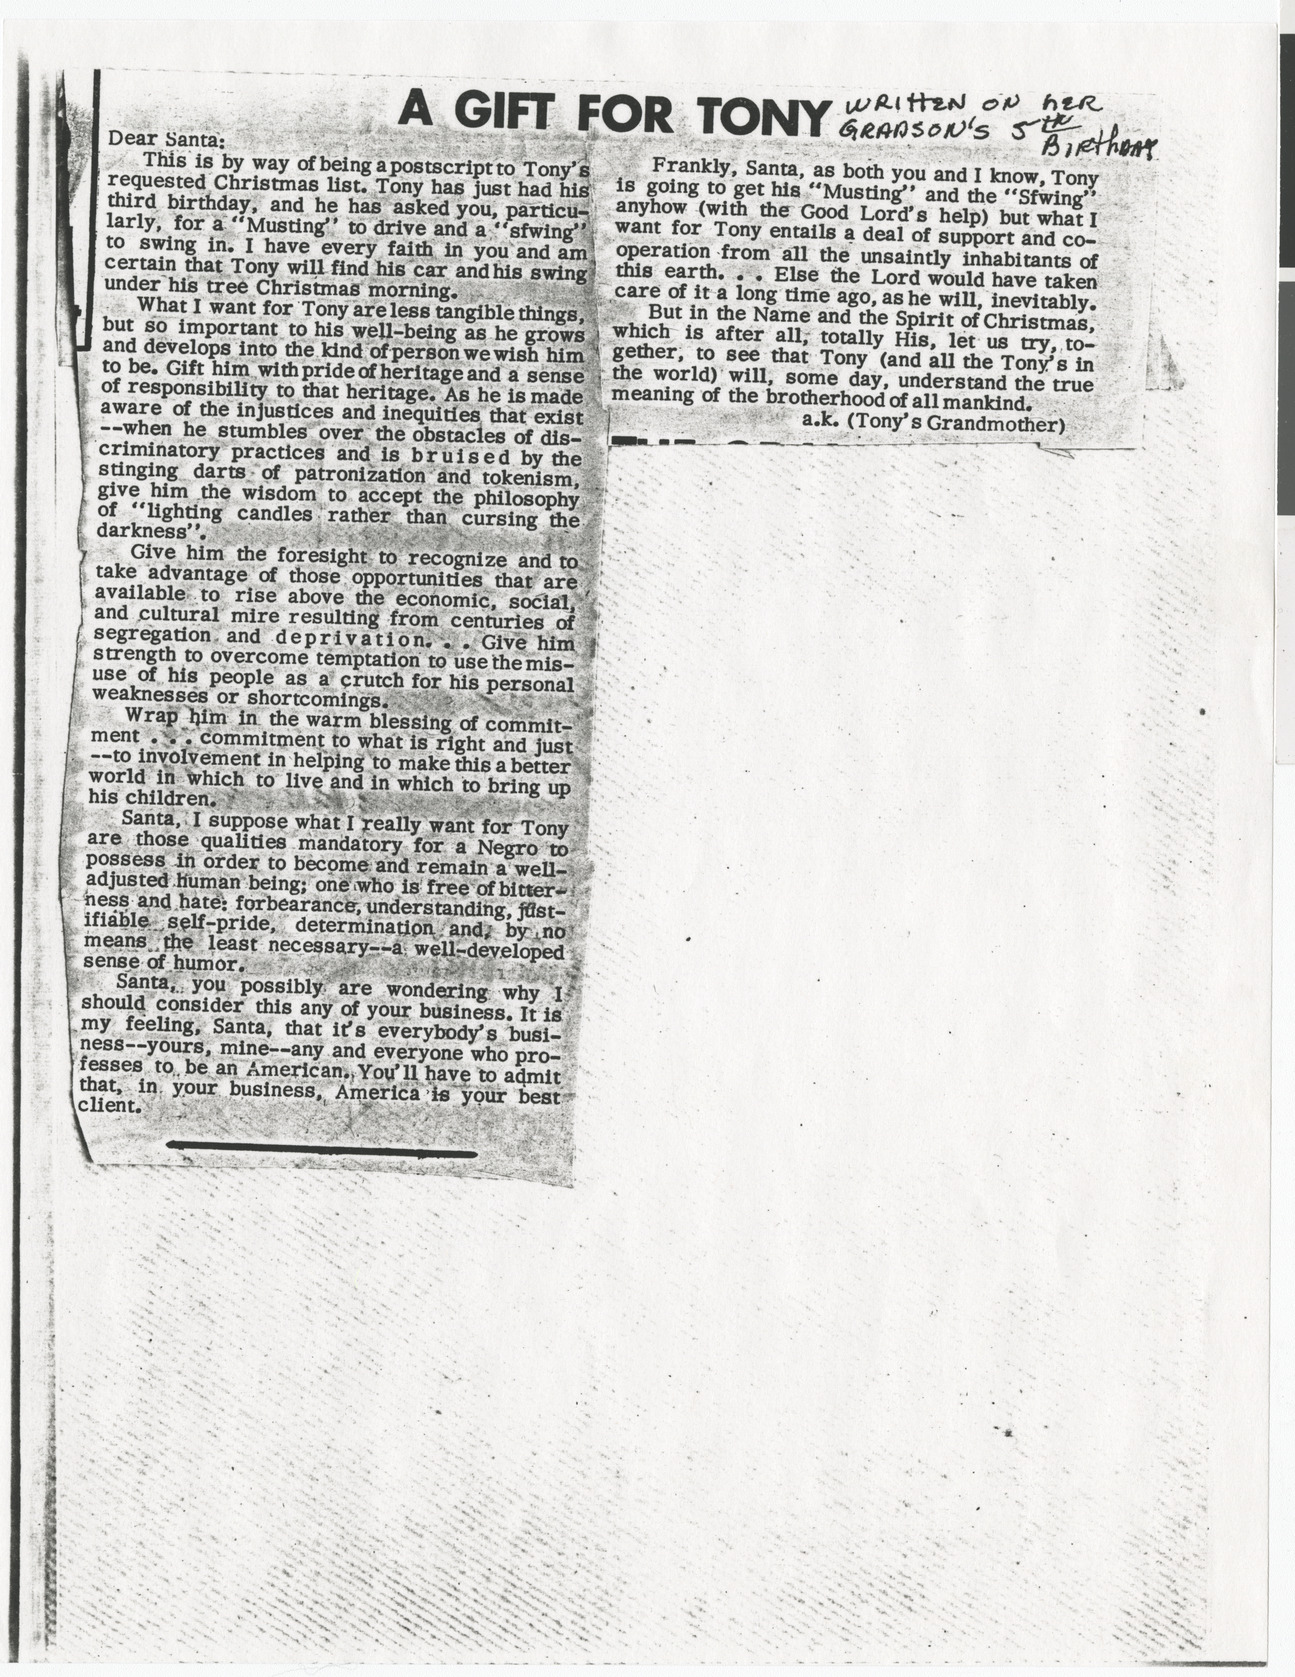 Newspaper clipping (copy), A Gift for Tony, publication unknown, no date